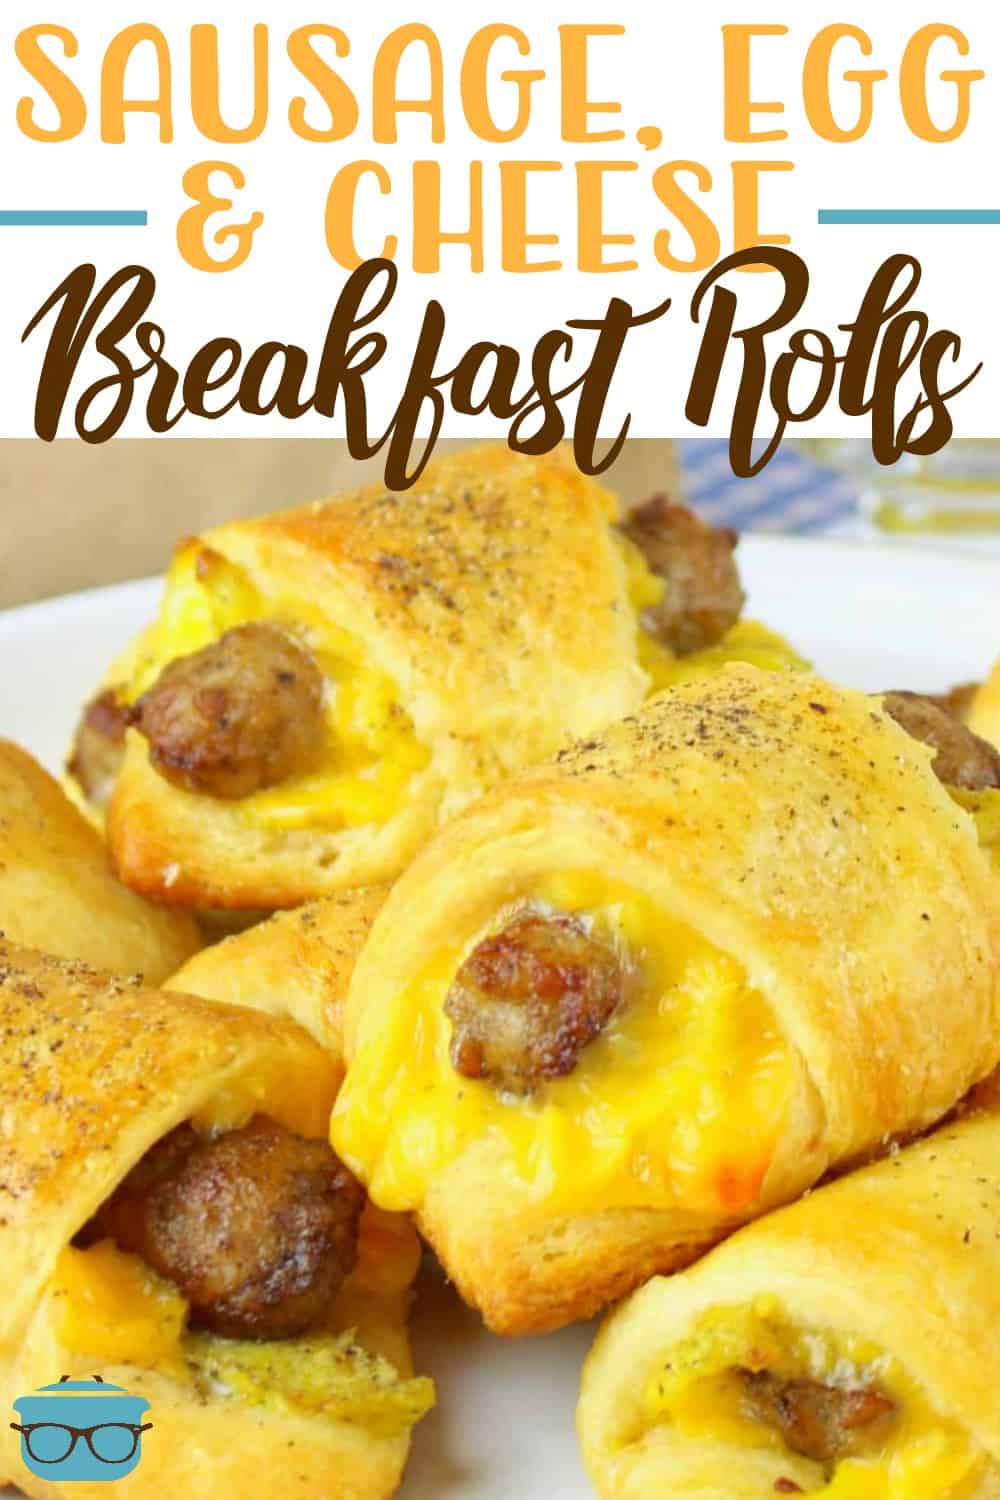 Sausage, Egg and Cheese Breakfast Rolls shown stacked on a white plate.